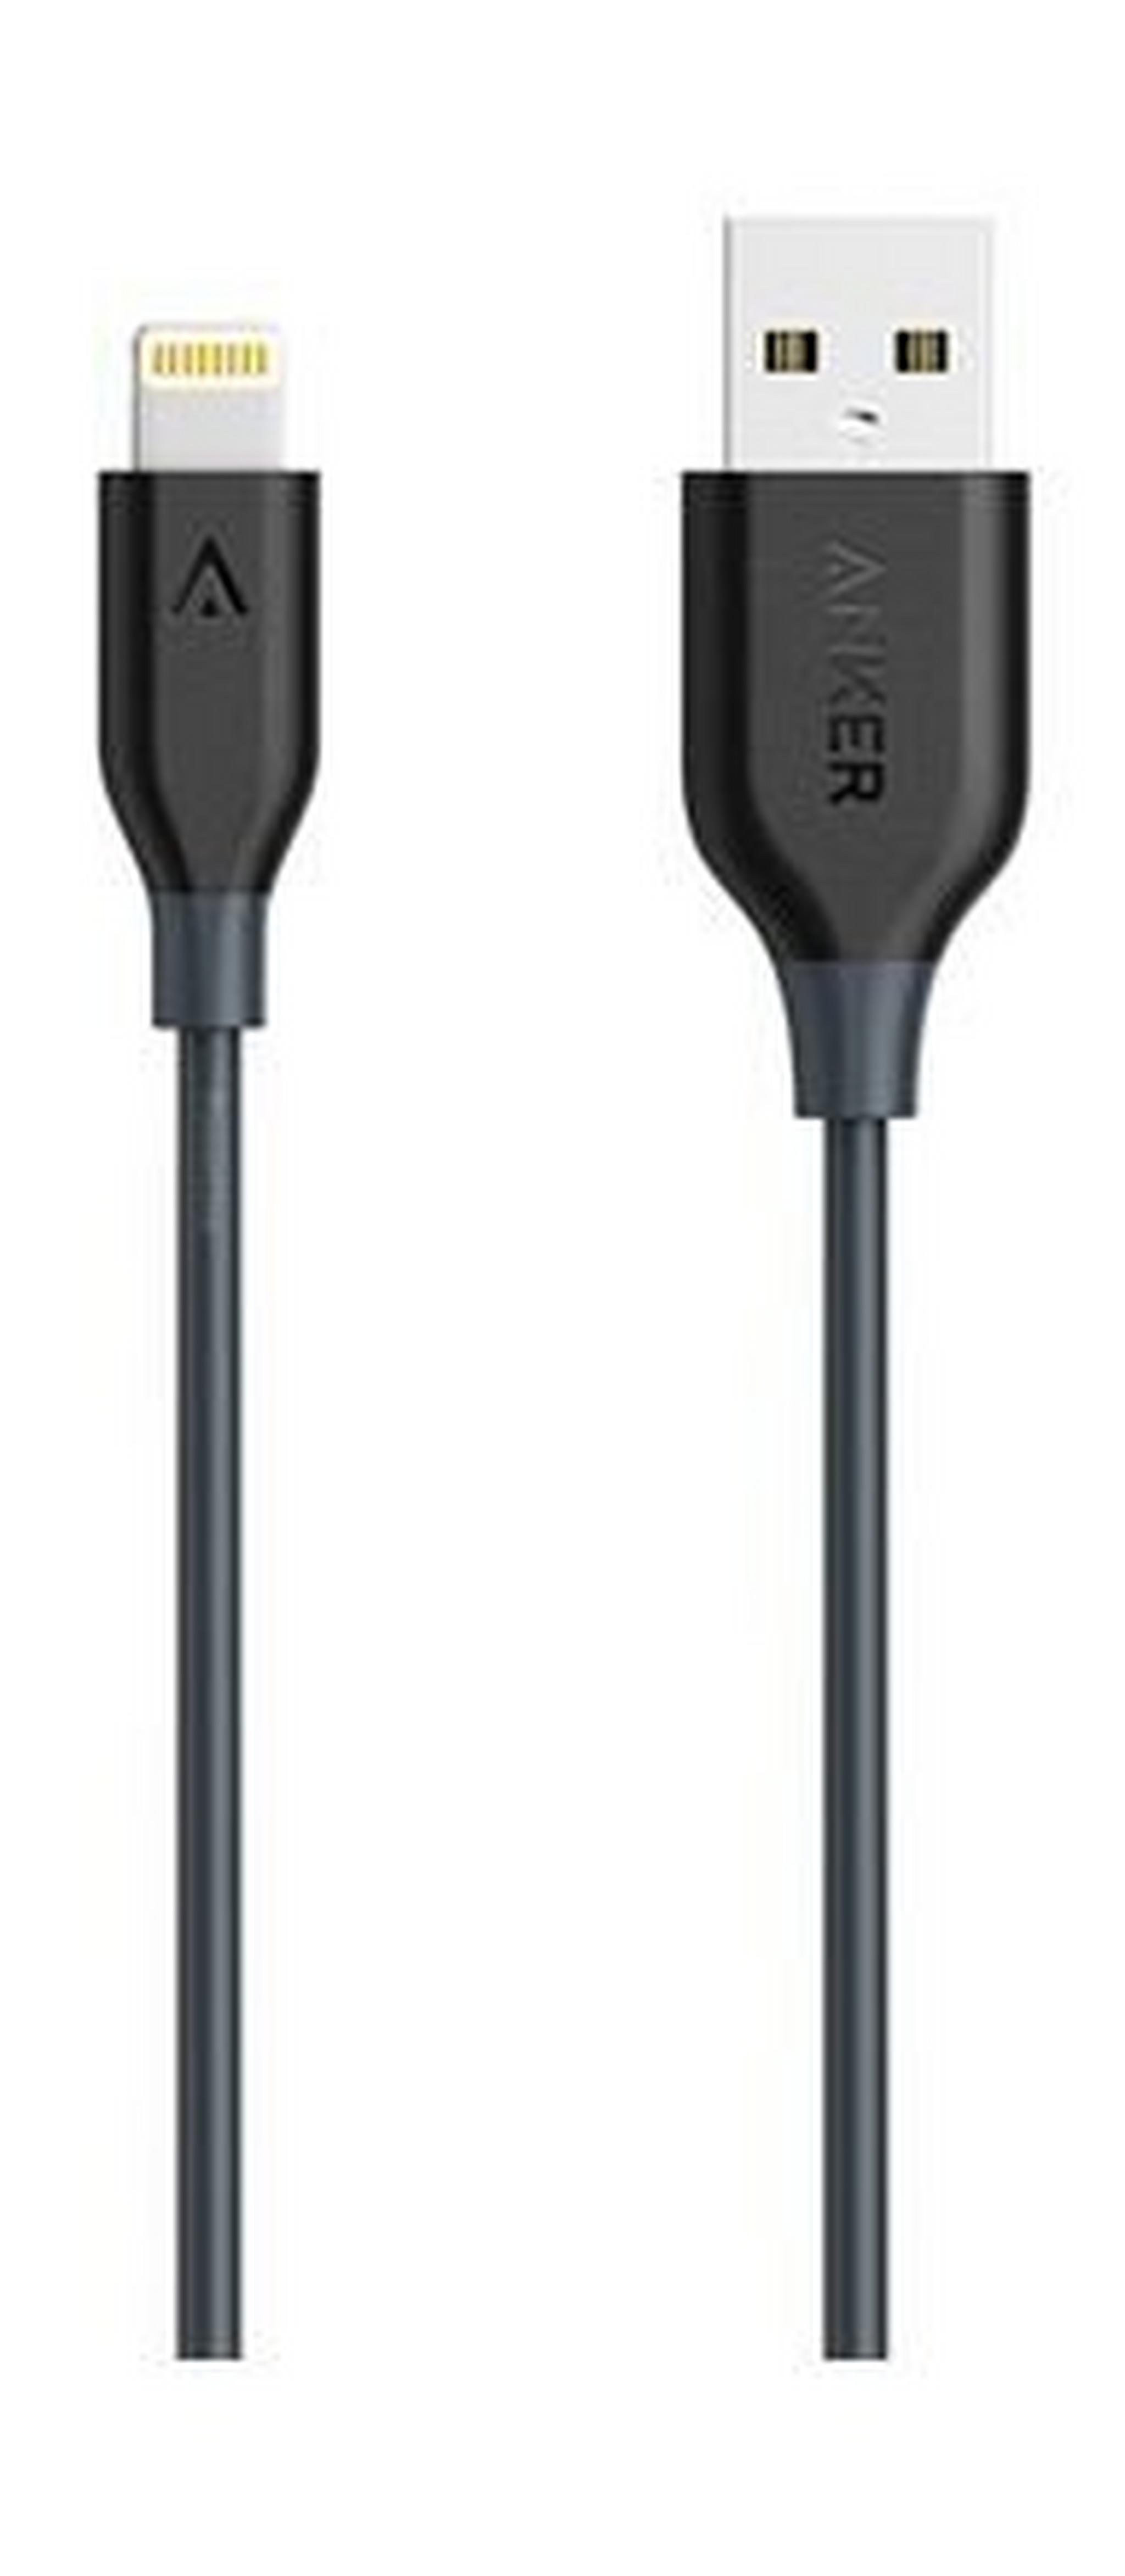 Anker PowerLine Lightning Cable 0.9M (ANK-A8111-GB) Gray